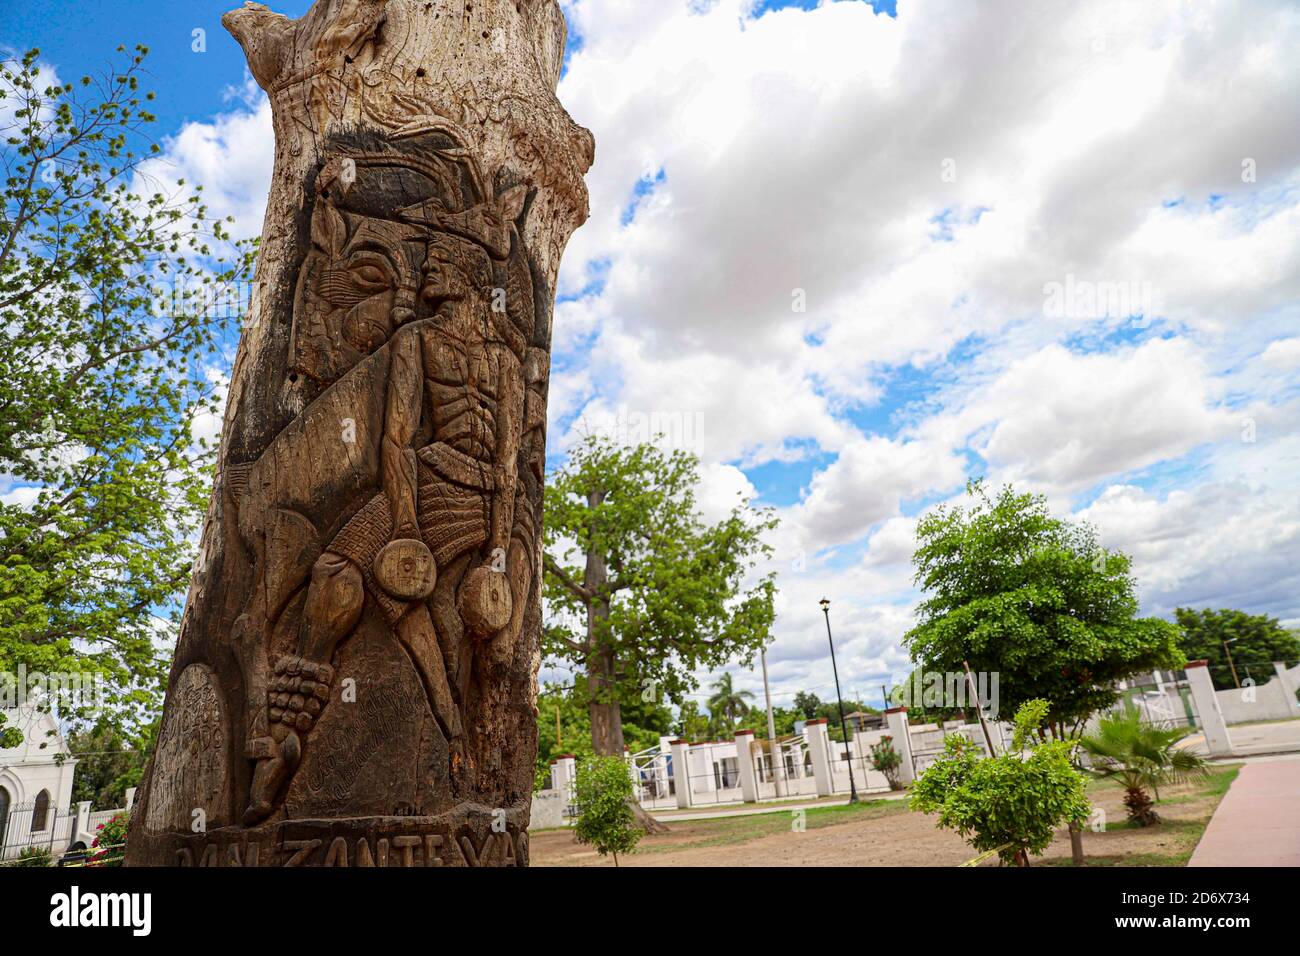 Danzante Yaqui, deer figure or dance of the deer carved on wood in a dry tree trunk in the town of Cocorit, Sonora, Mexico. Yaqui people in Cajeme, Mexico. (Photo by Luis Gutierrez / Norte Photo) Danzante Yaqui, figura de venado o danza del venado tallado sobre la madera en un tronco de arbol seco en el pueblo de Cocorit, Sonora , Mexico. Pueblo Yaqui en Cajeme, Mexico (Photo by Luis Gutierrez/Norte Photo) Stock Photo